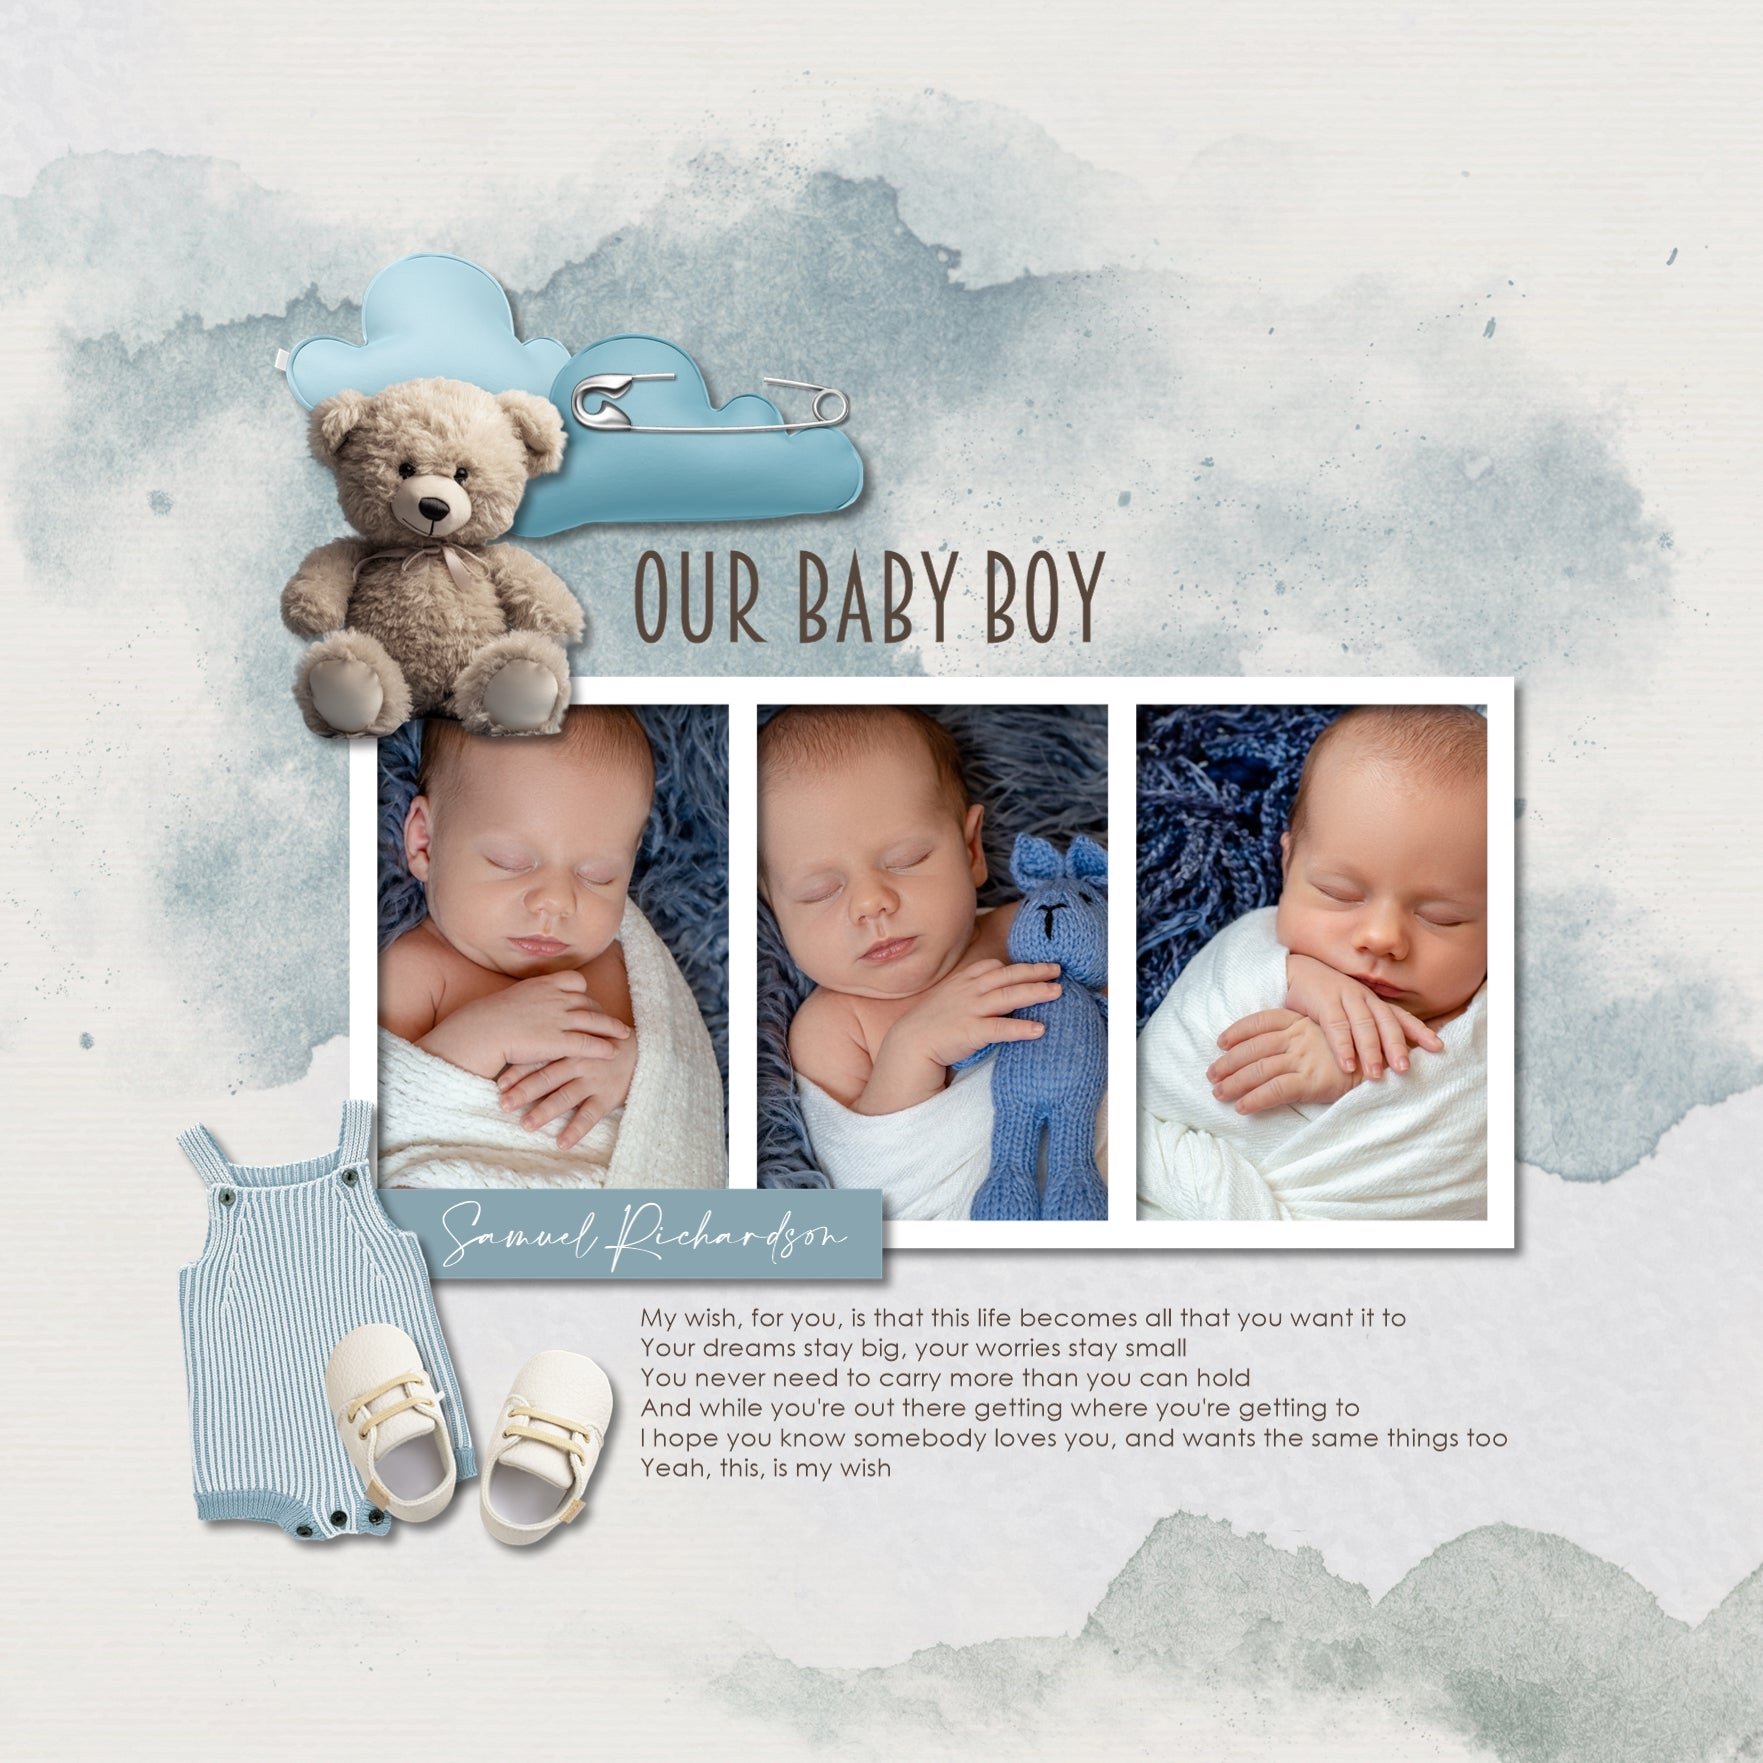 Capture the special moments of your baby through the toddler years with these pastel watercolor digital scrapbooking papers by Lucky Girl Creative digital art. Create unique baby announcements, baby shower gifts, and even Baby's 1st Year albums. Great for everyday use, spring, and even weddings and bridal showers!